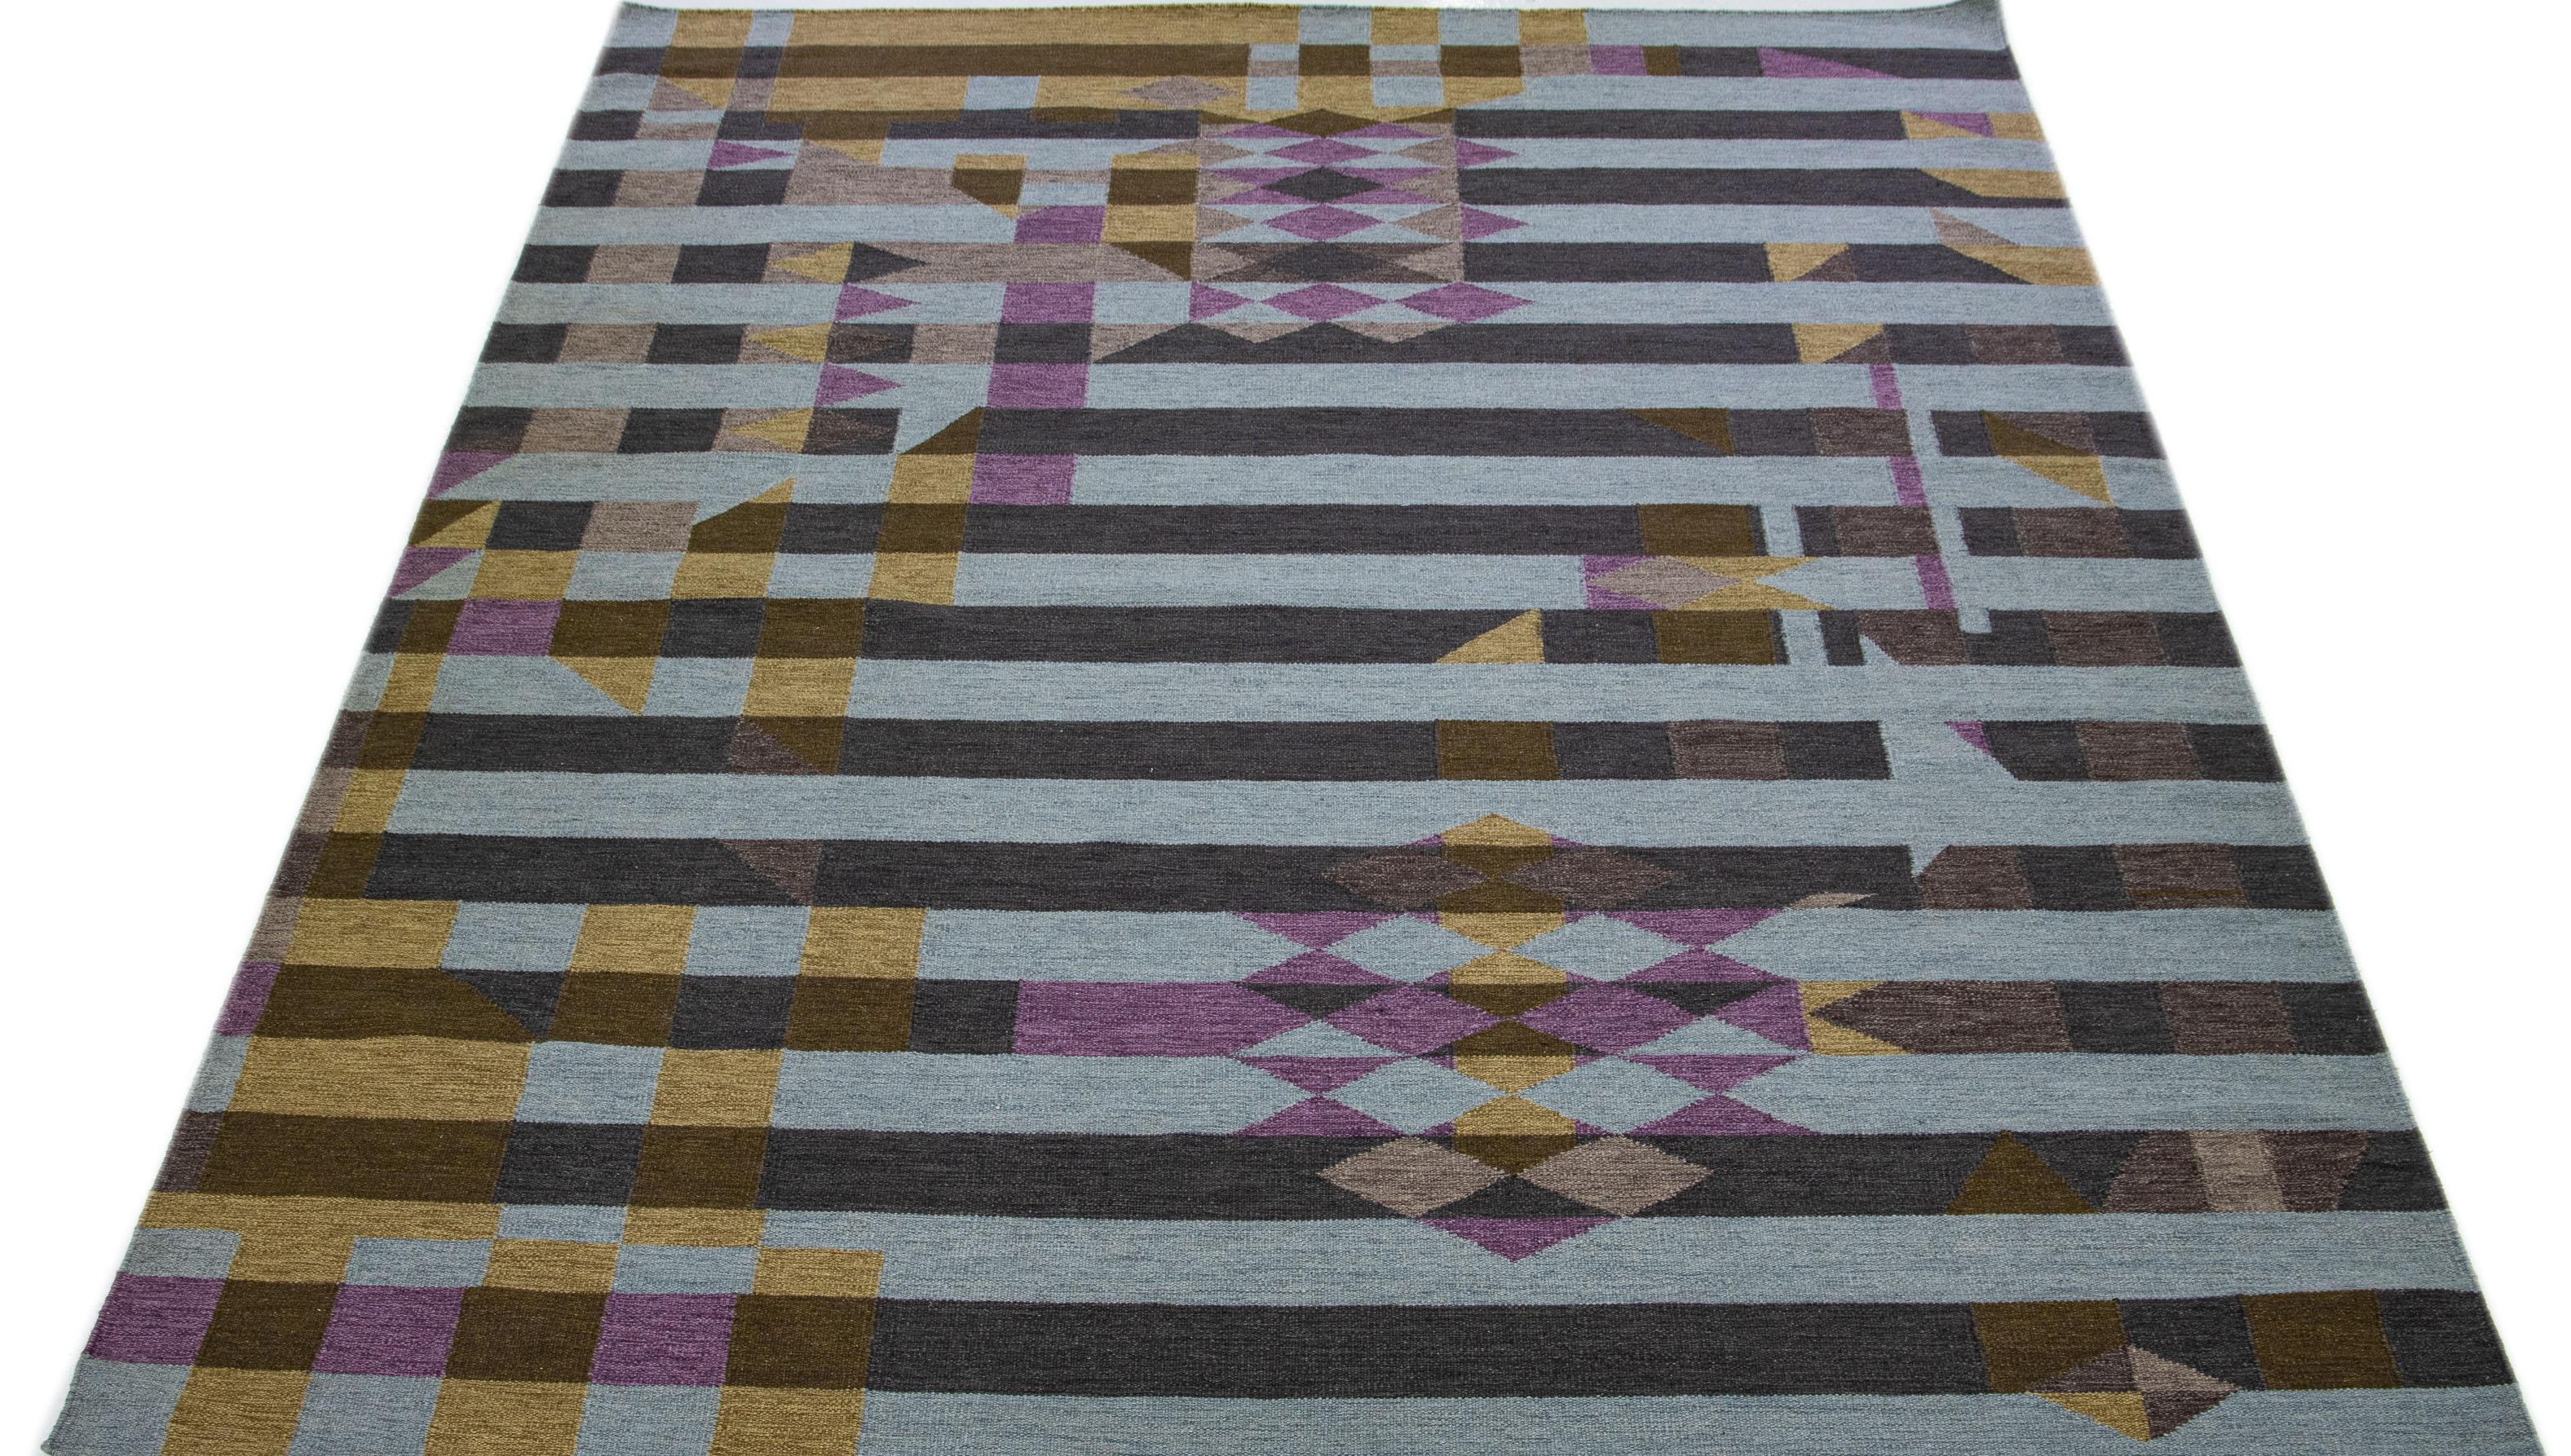 Elevate your interior decor with ease by adding this handmade Indian rug to your home. Featuring a modern interpretation of the traditional Kilim flatweave technique, this piece boasts high-quality wool and a chic gray color palette for a